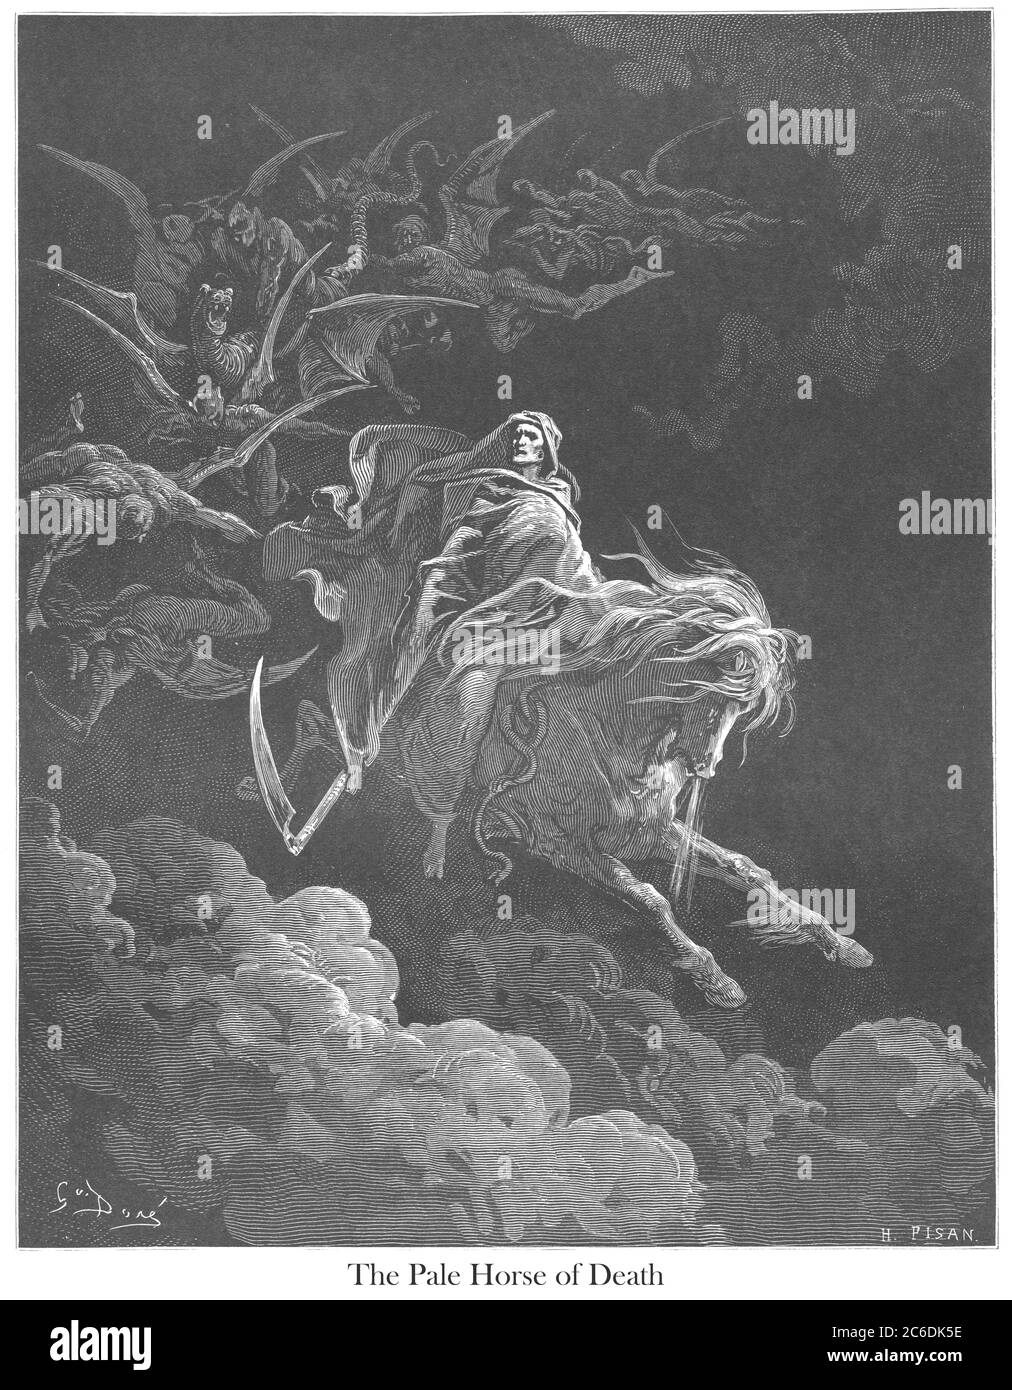 The Pale Horse of Death (or The Vision of Death) [Revelation 6:7-8] From the book 'Bible Gallery' Illustrated by Gustave Dore with Memoir of Dore and Descriptive Letter-press by Talbot W. Chambers D.D. Published by Cassell & Company Limited in London and simultaneously by Mame in Tours, France in 1866 Stock Photo